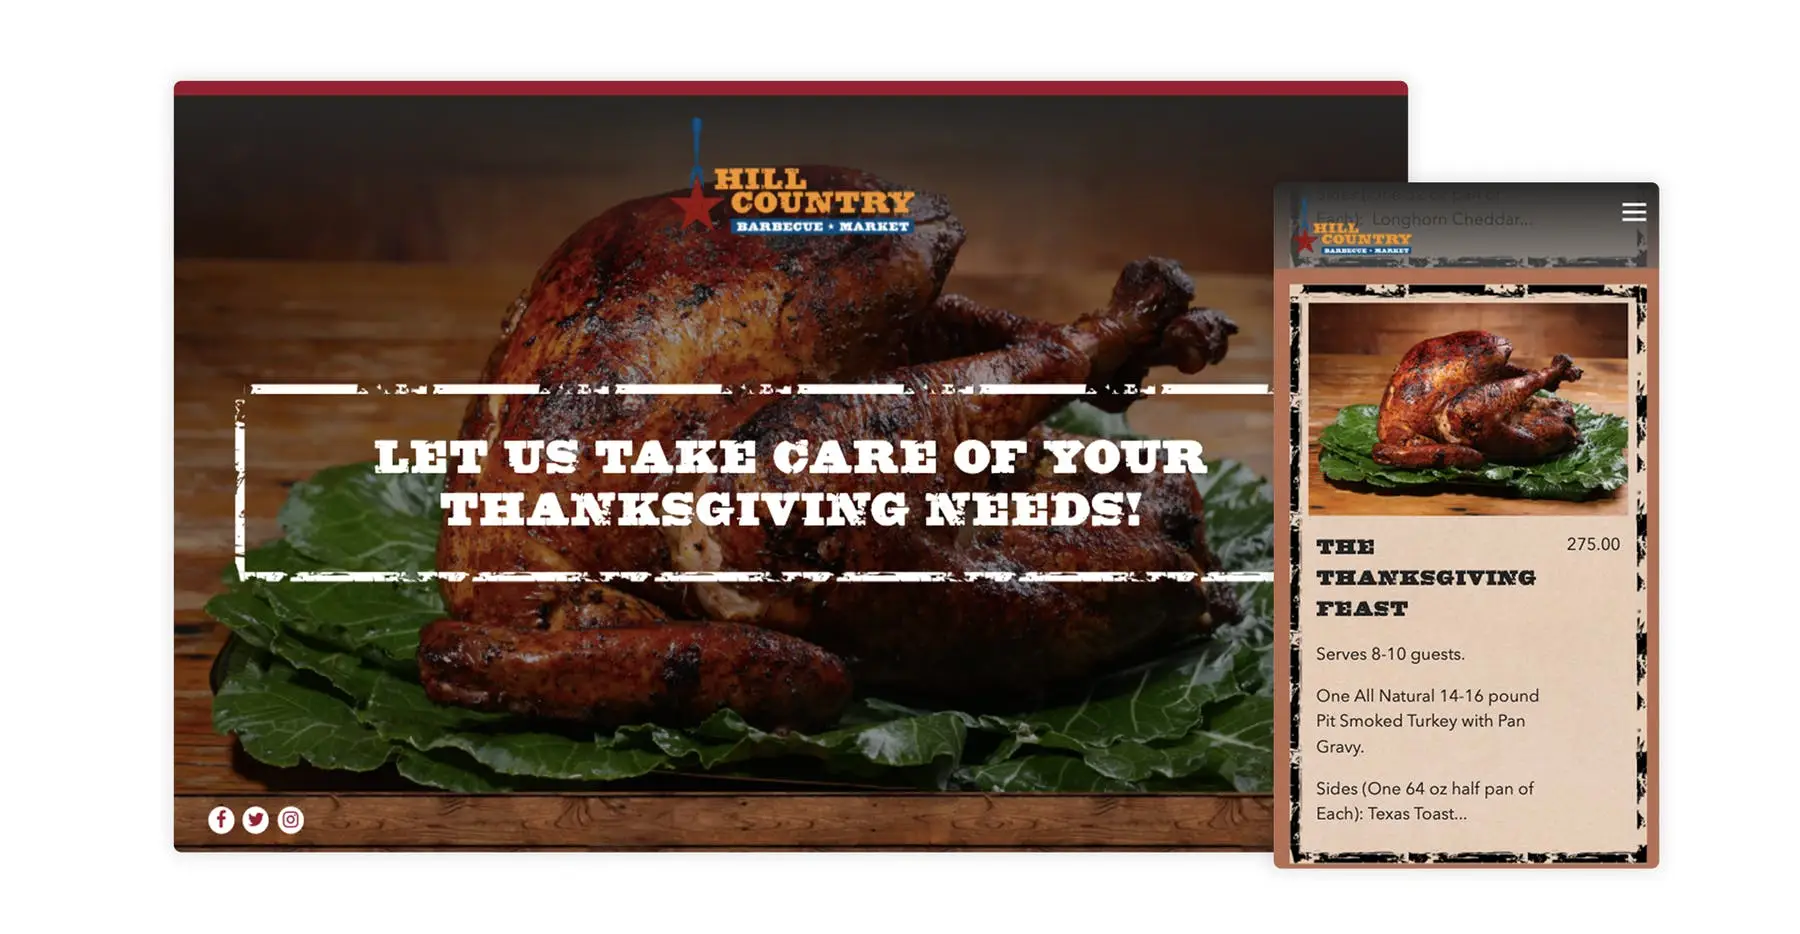 the website for hill country barbecue